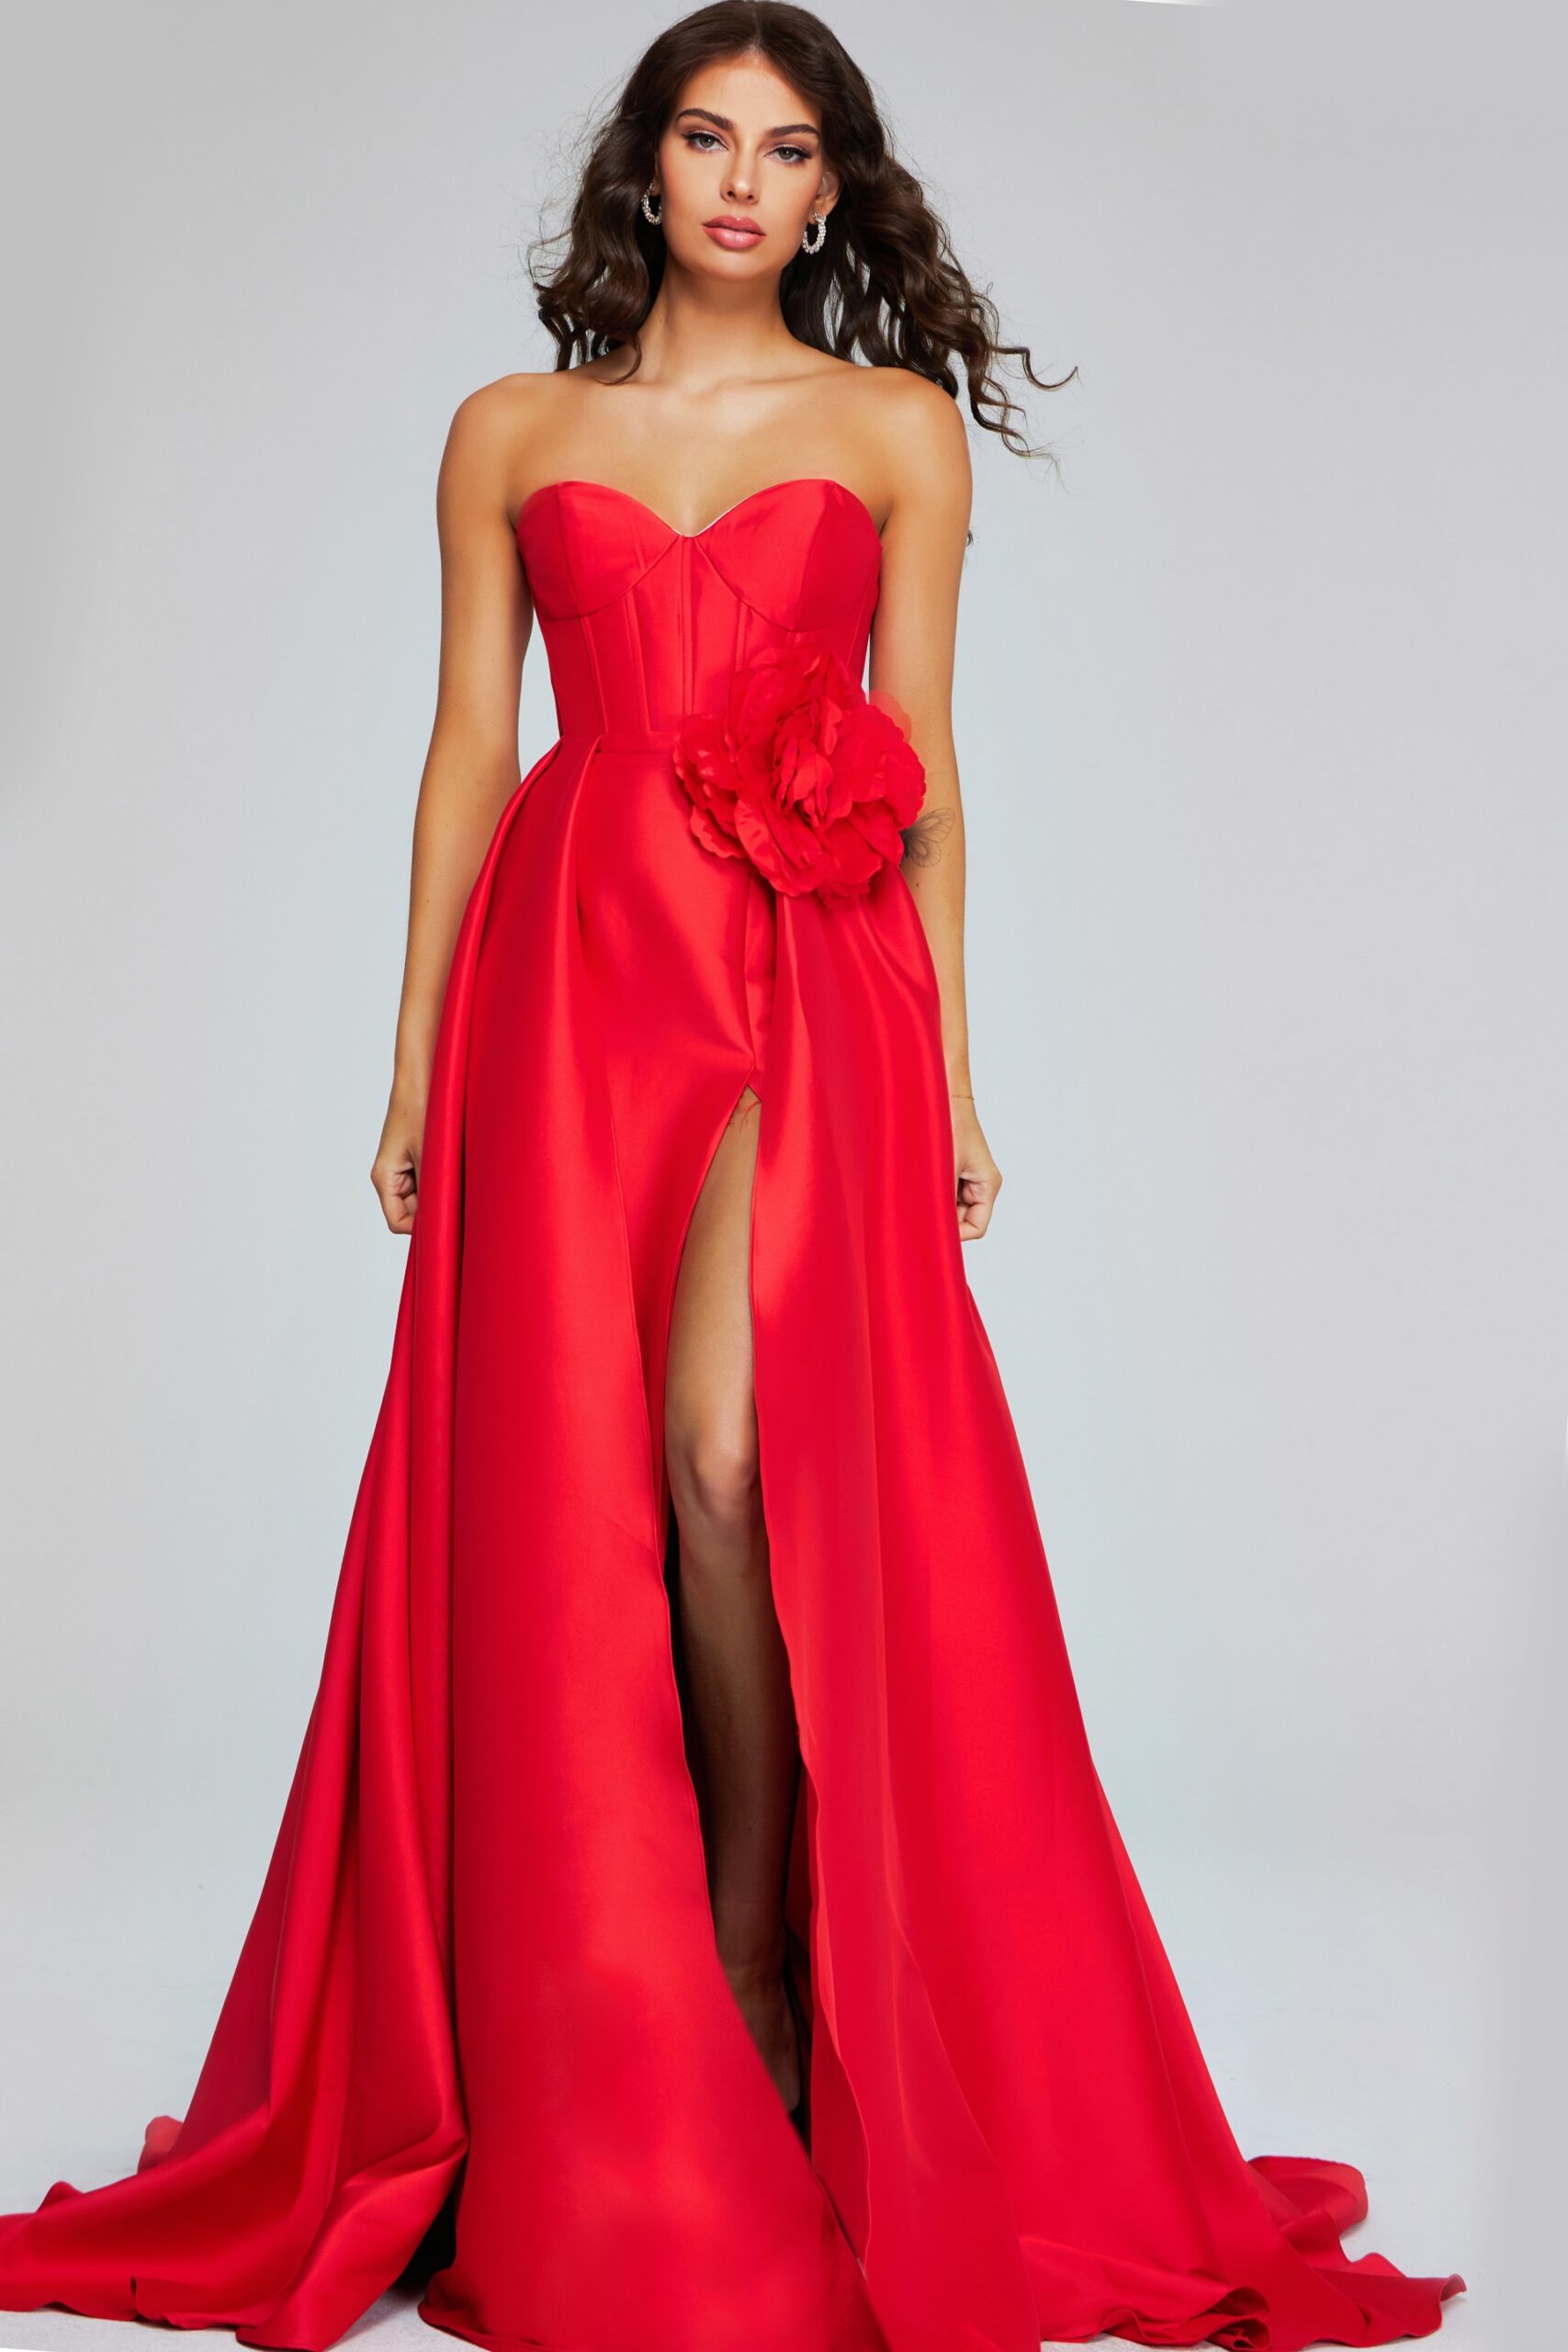 Model wearing Stunning Red Strapless Gown with High Slit and Floral Accent 40826